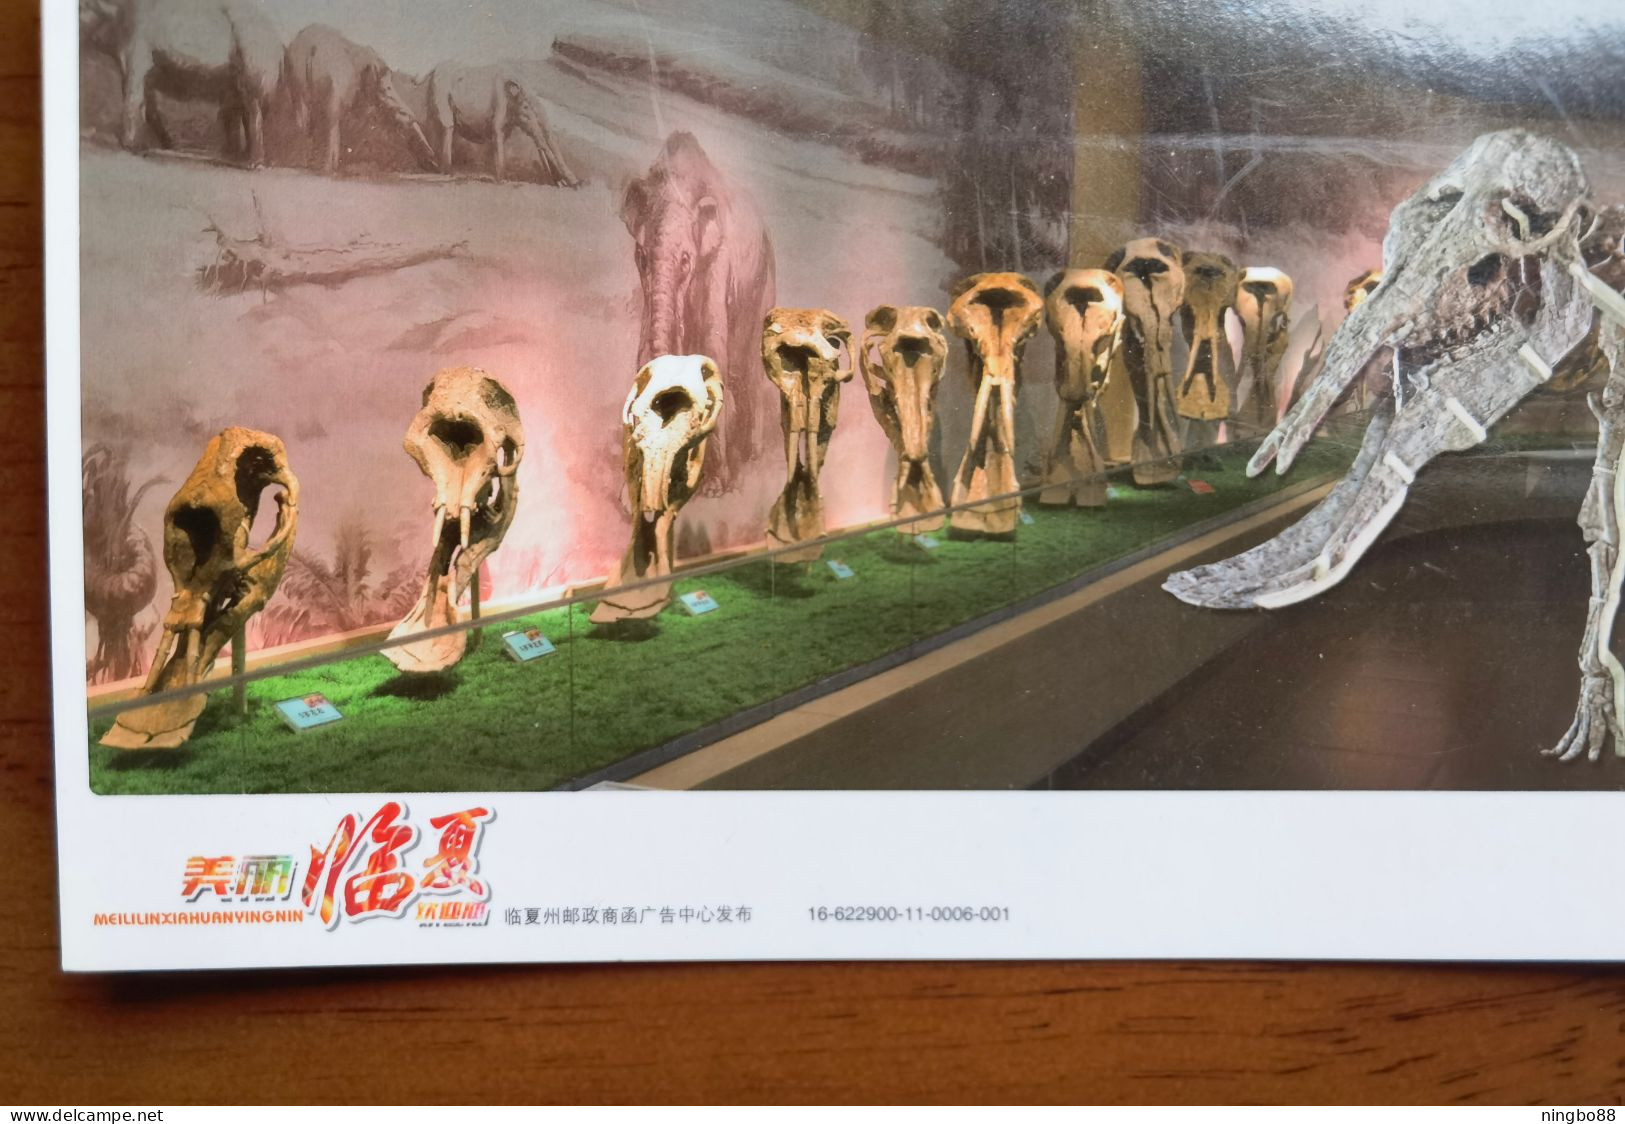 Linxia Platybelodon Danovi Elephant Fossil,China 2016 Hezheng Ancient Animal Fossil Museum Advertising Pre-stamped Card - Fossilien